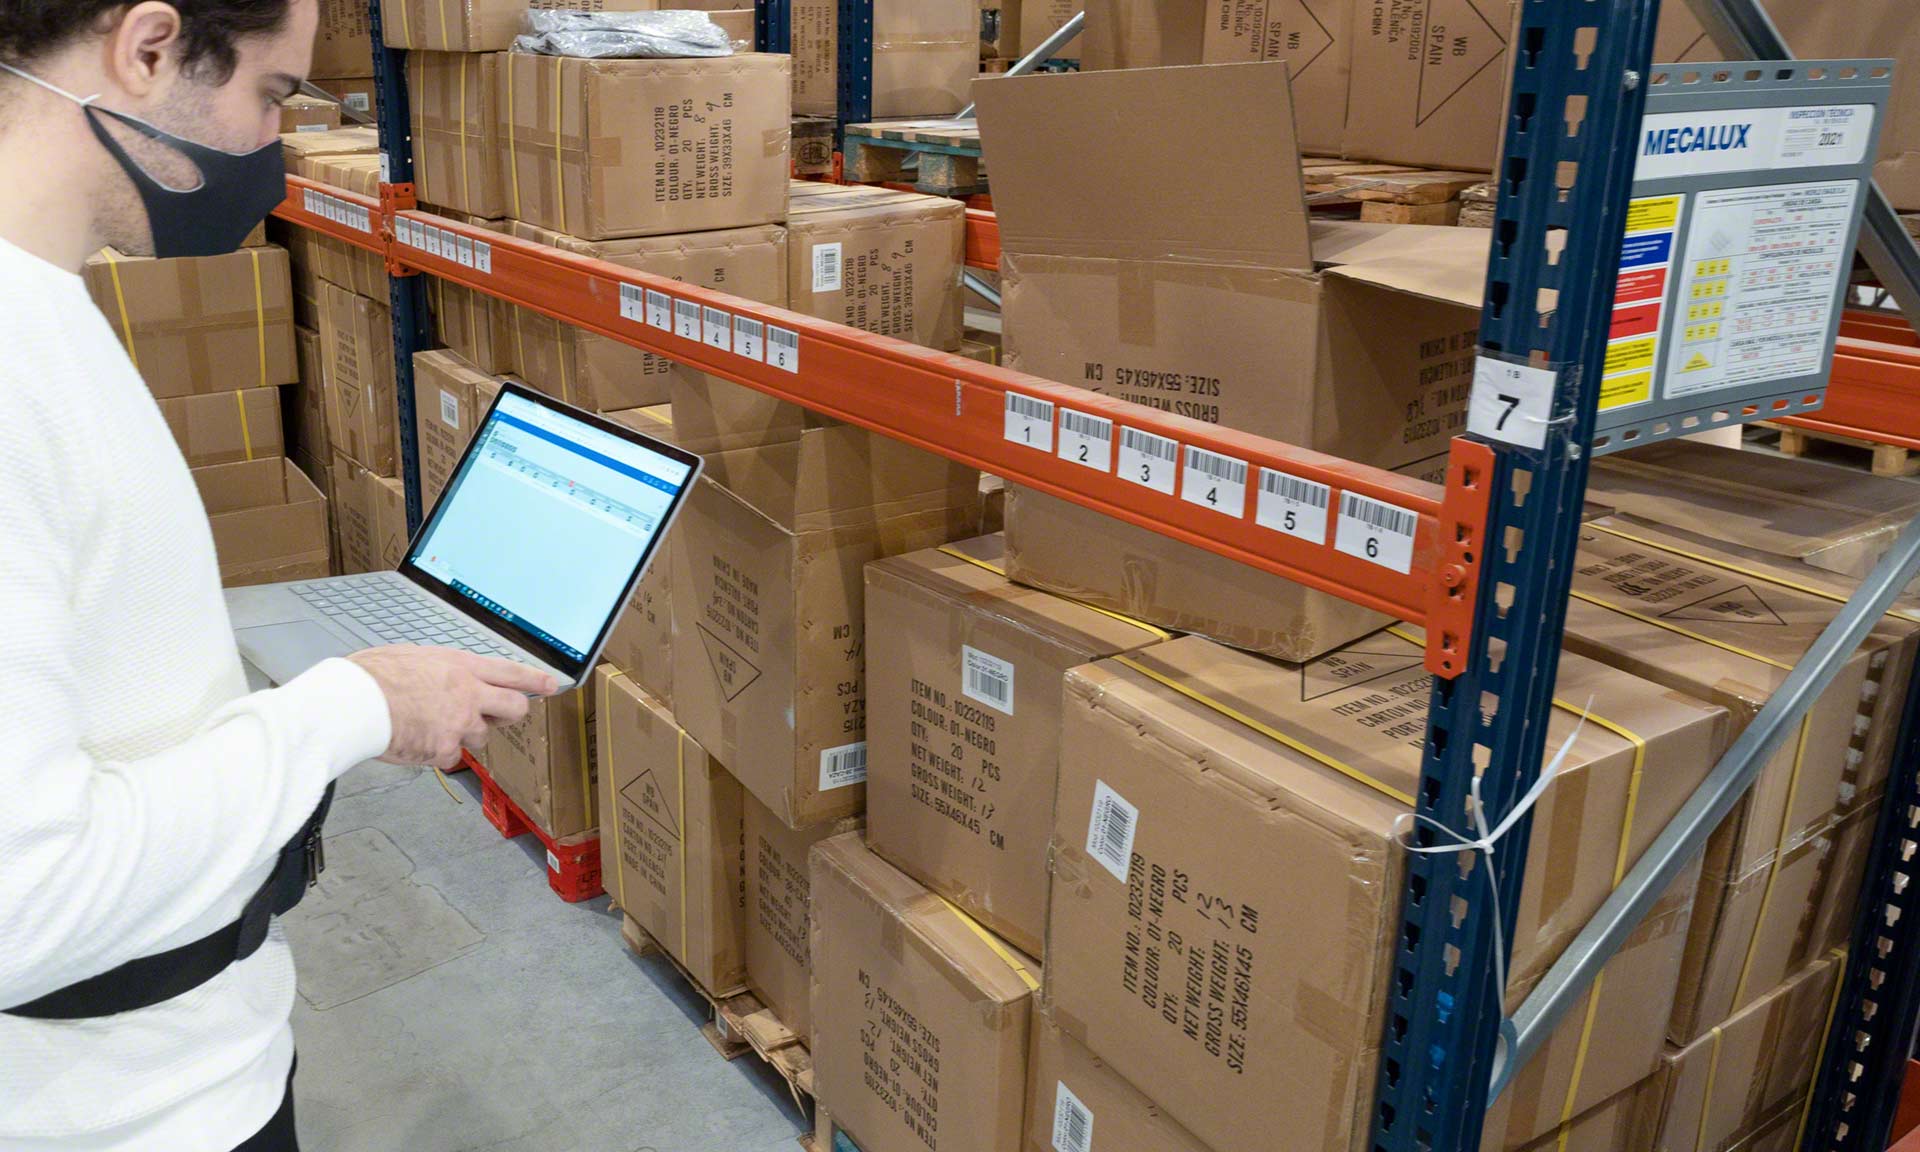 Stock control: the main warehouse operation